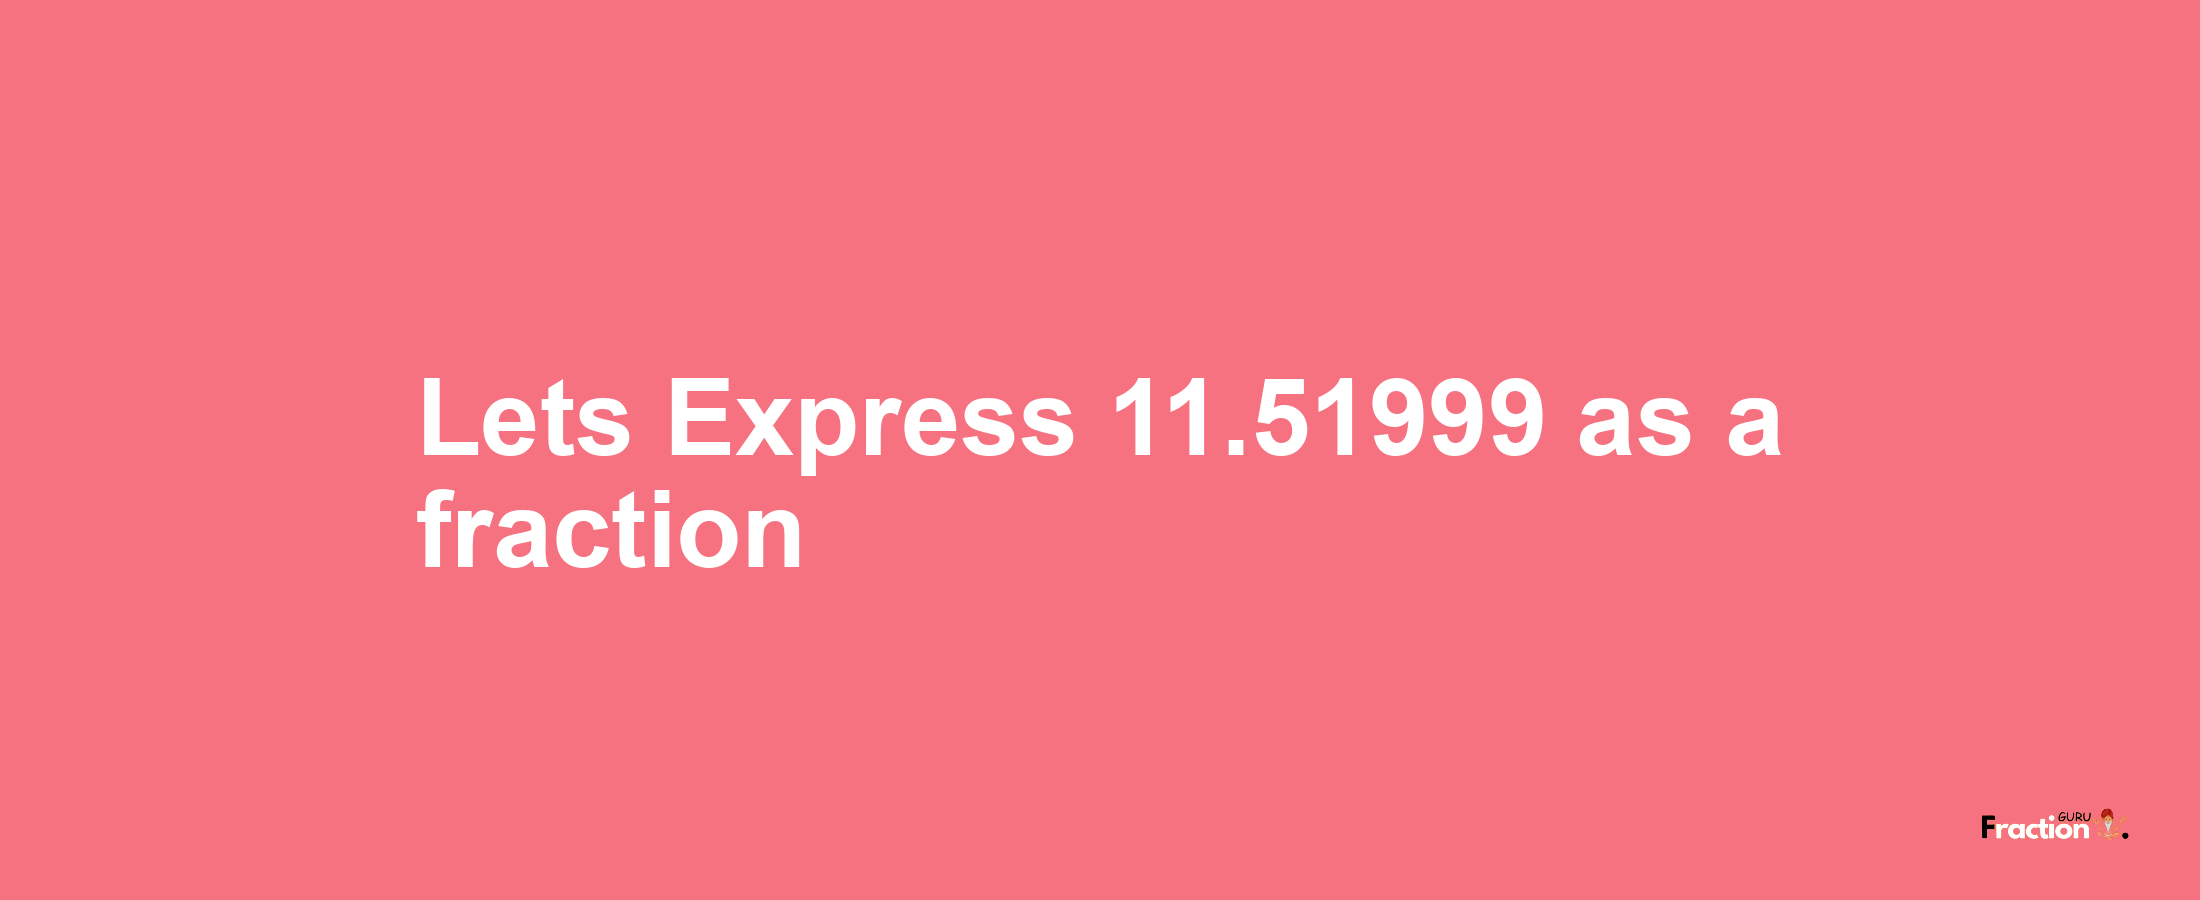 Lets Express 11.51999 as afraction